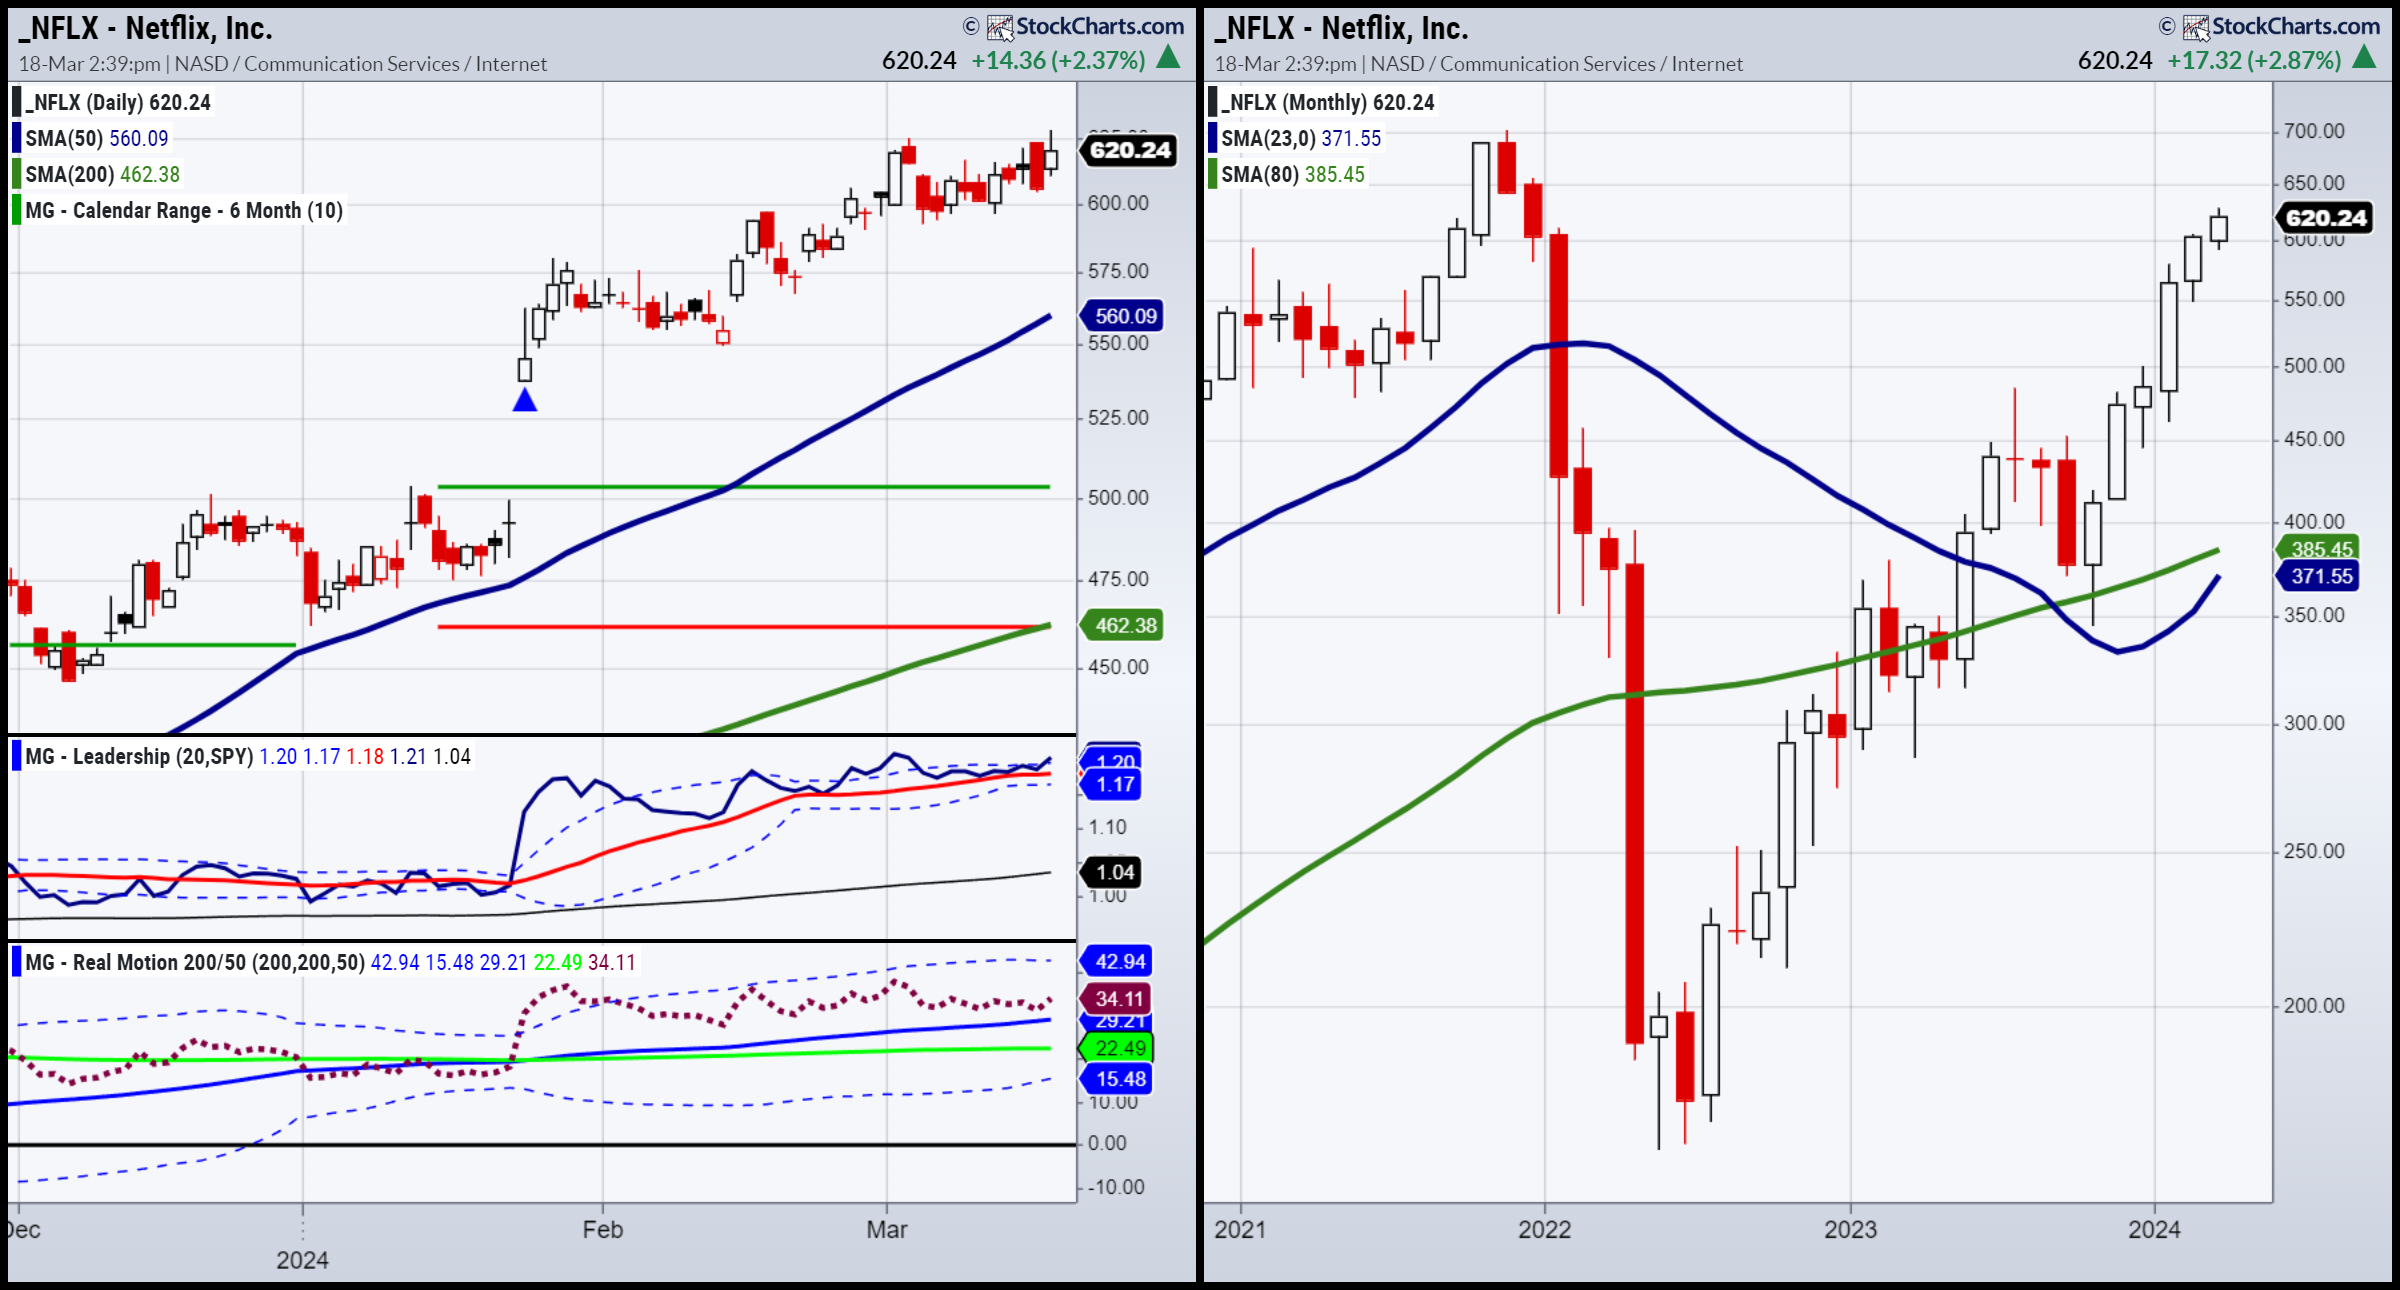 Netflix-Daily and Monthly Charts